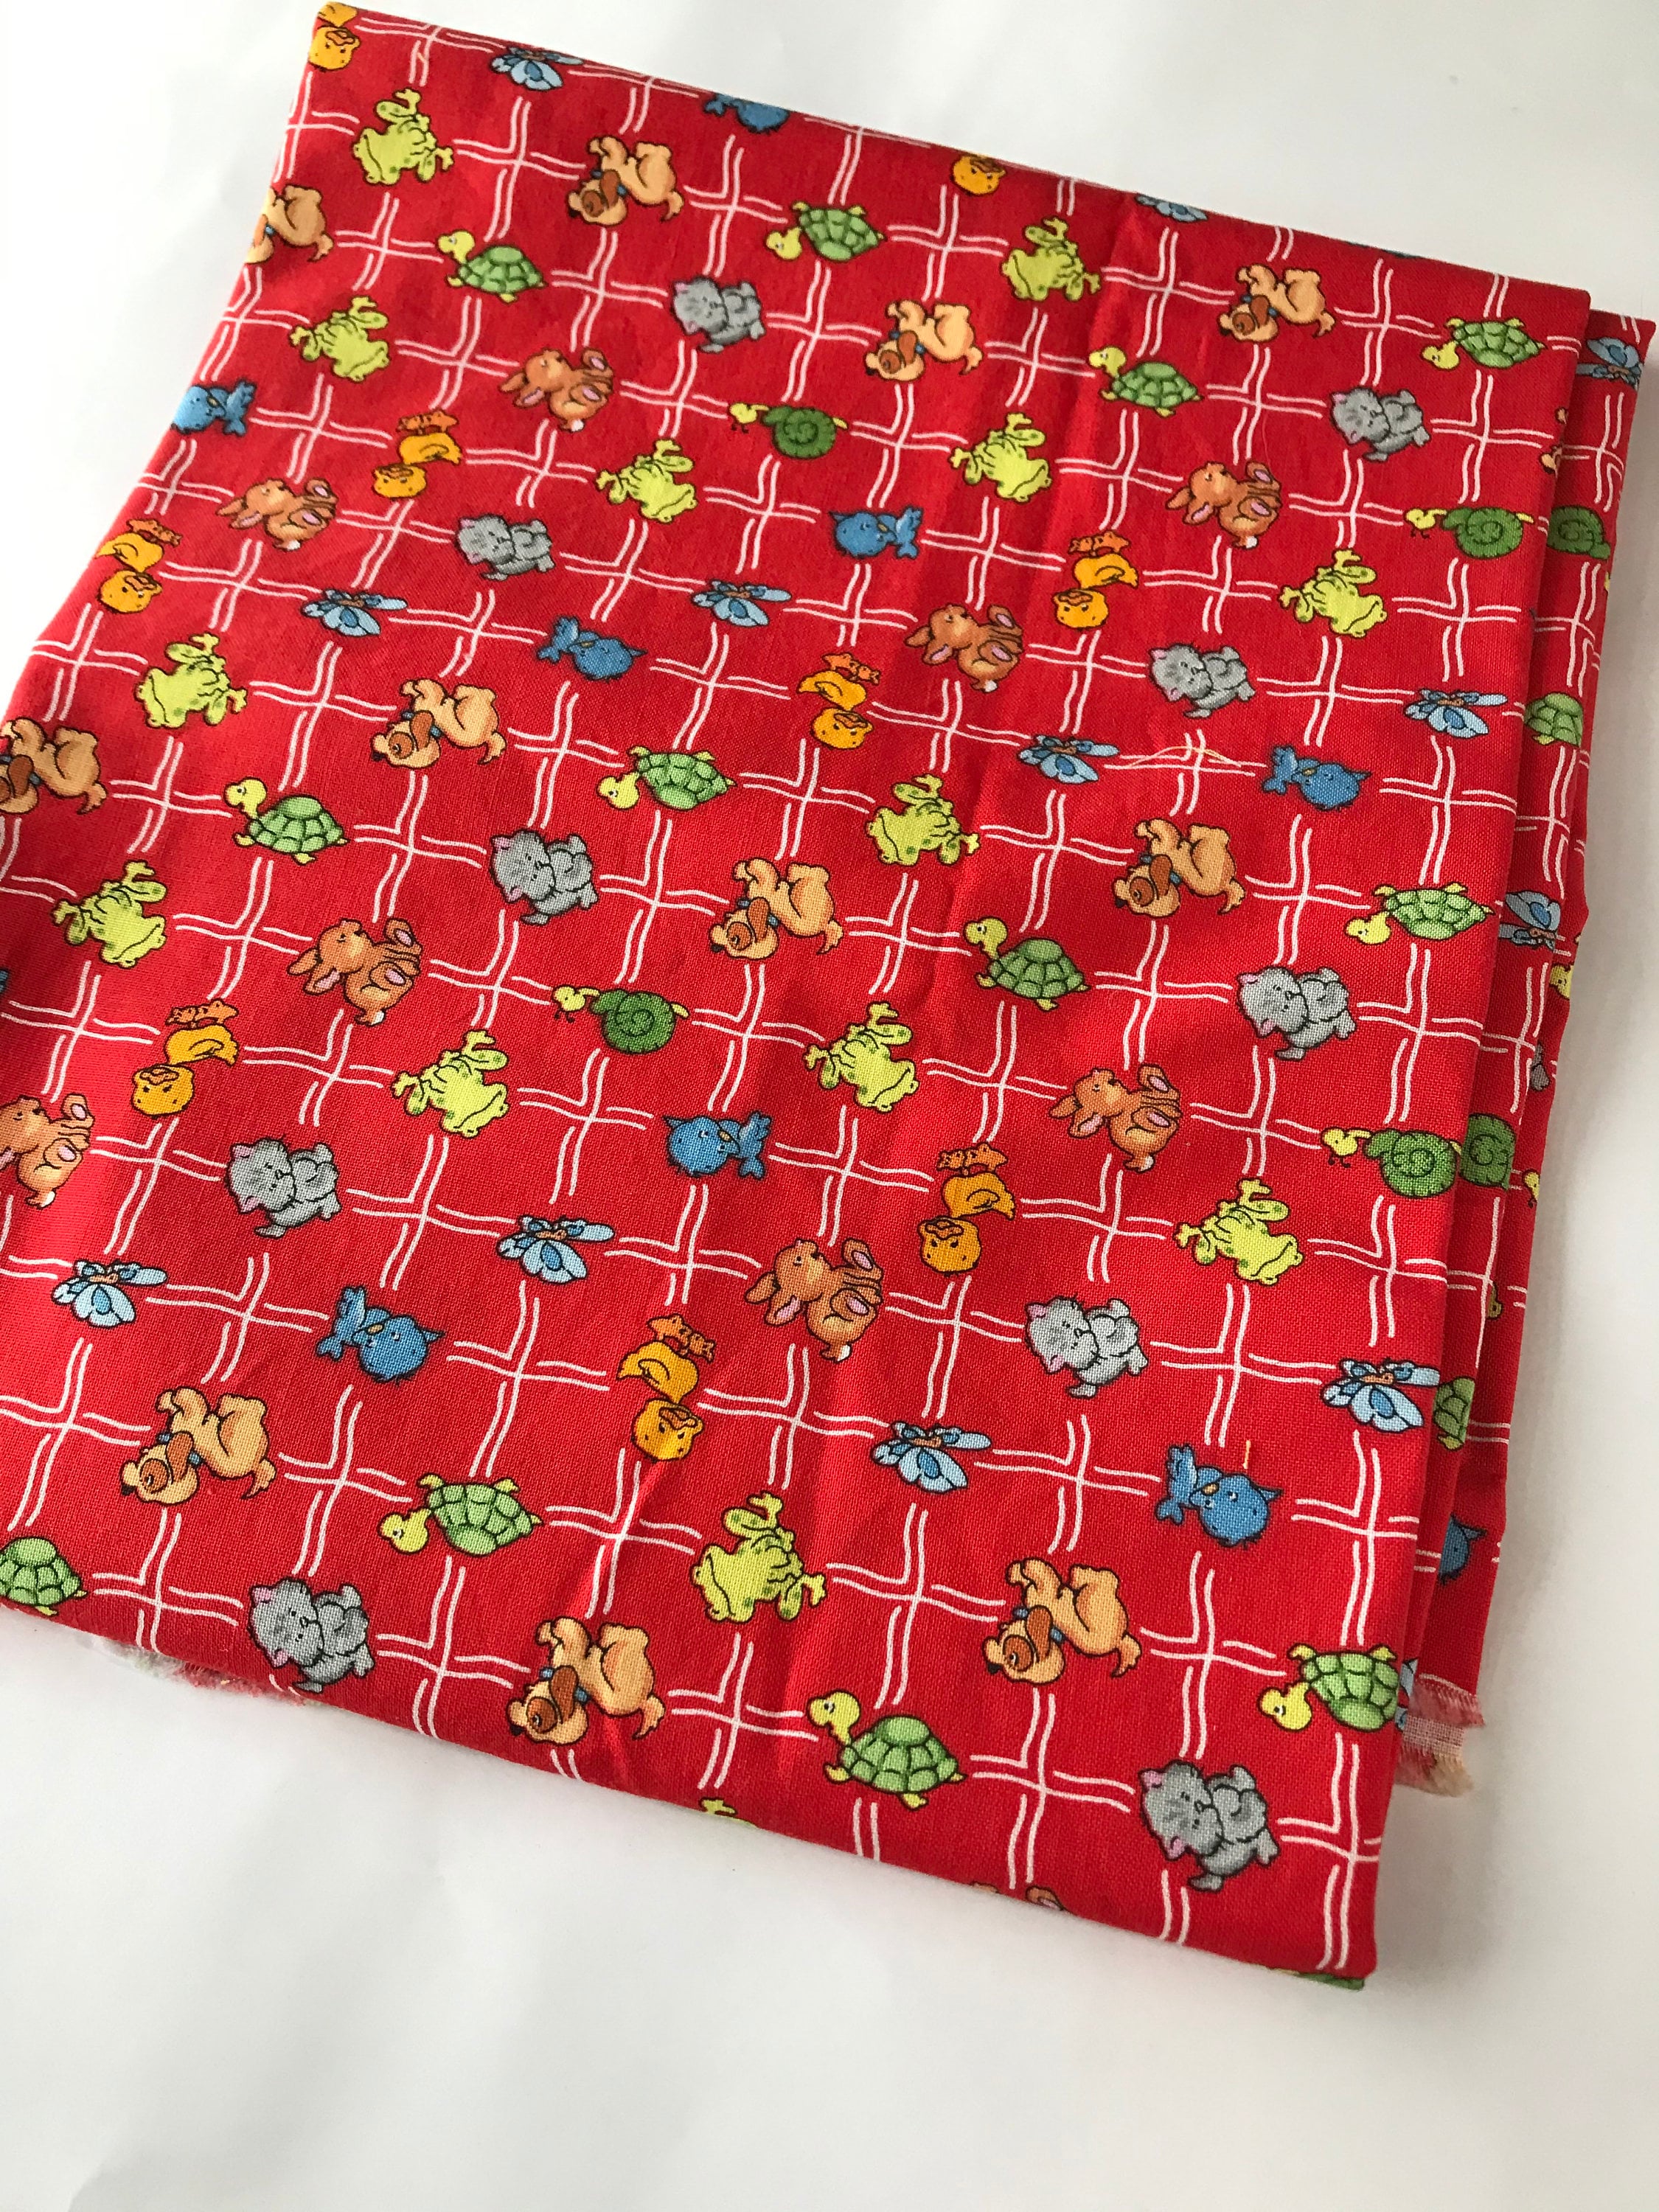 Cute Critter Fabric From puppy Love by Linda Hohag for Chanteclaire ...